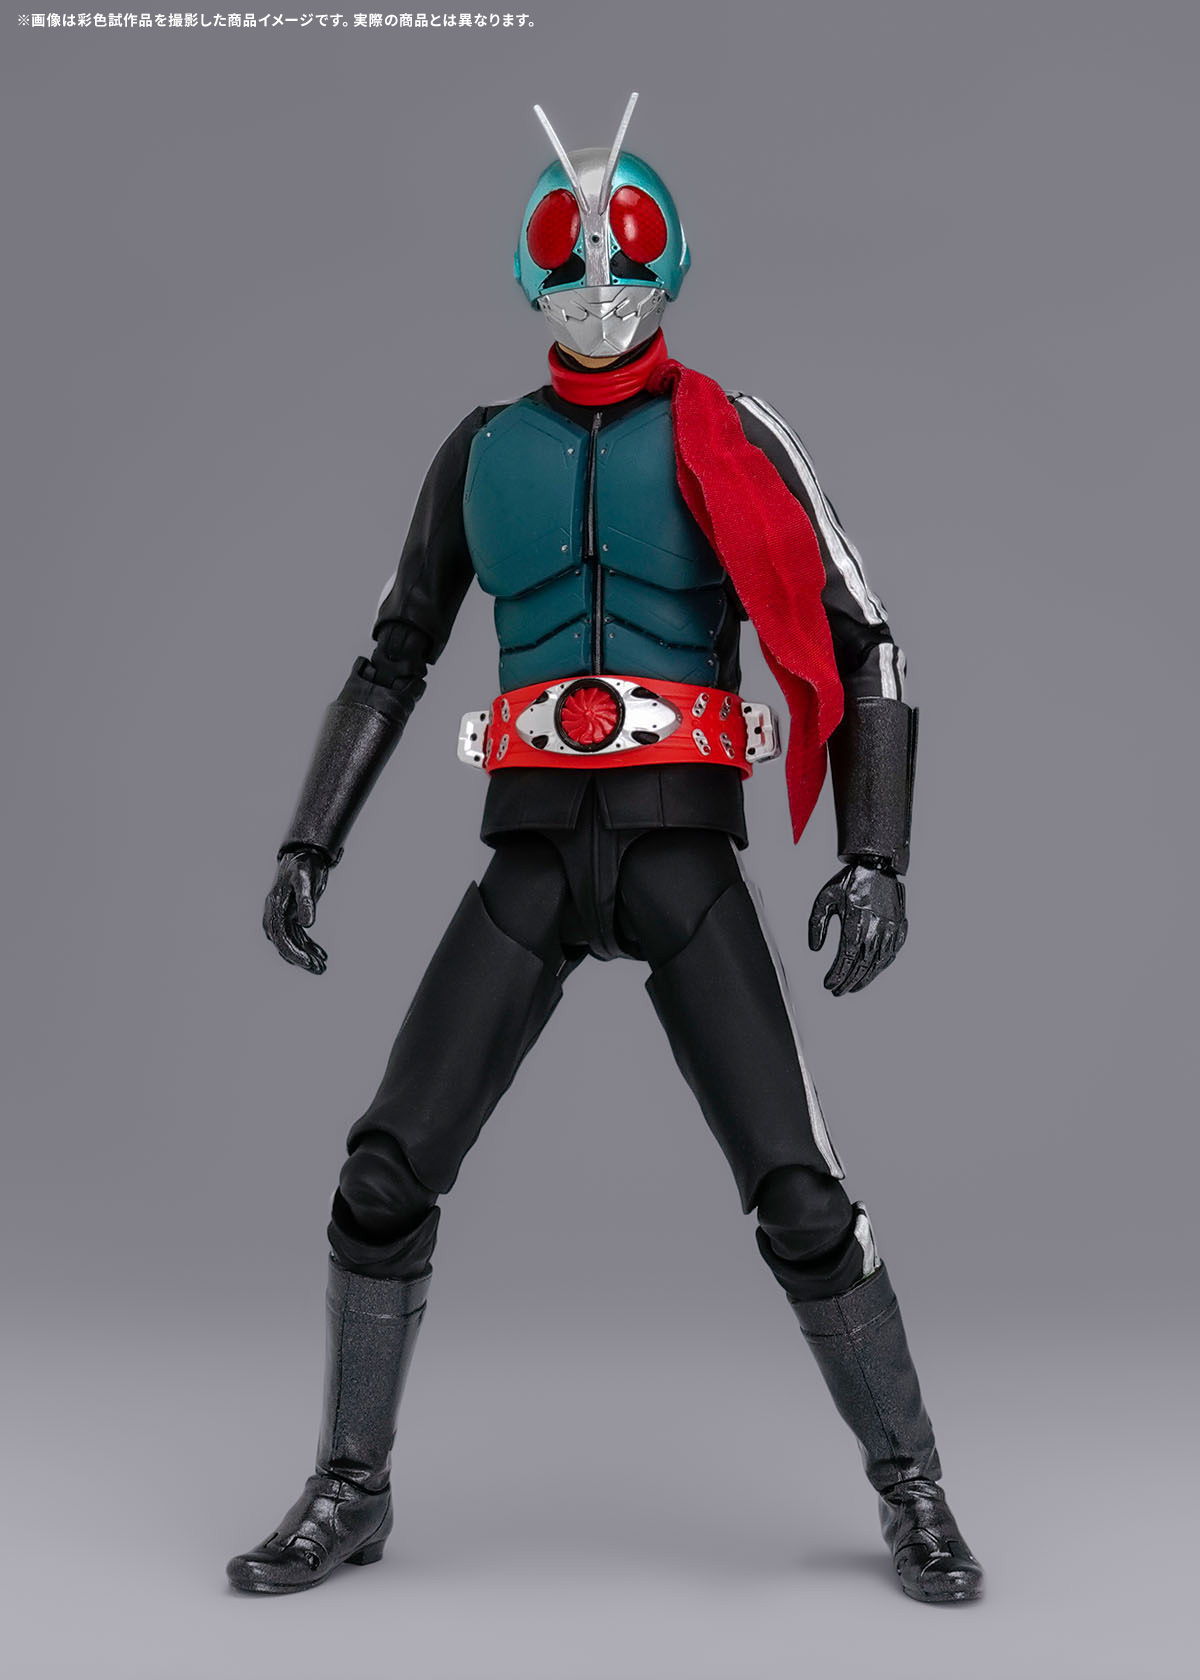 Introducing the pair united in the fight against Shocker, S.H.Figuarts MASKED RIDER NO. 2+1/ICHIMONJI HAYATO (SHIN MASKED RIDER), plus more series items!